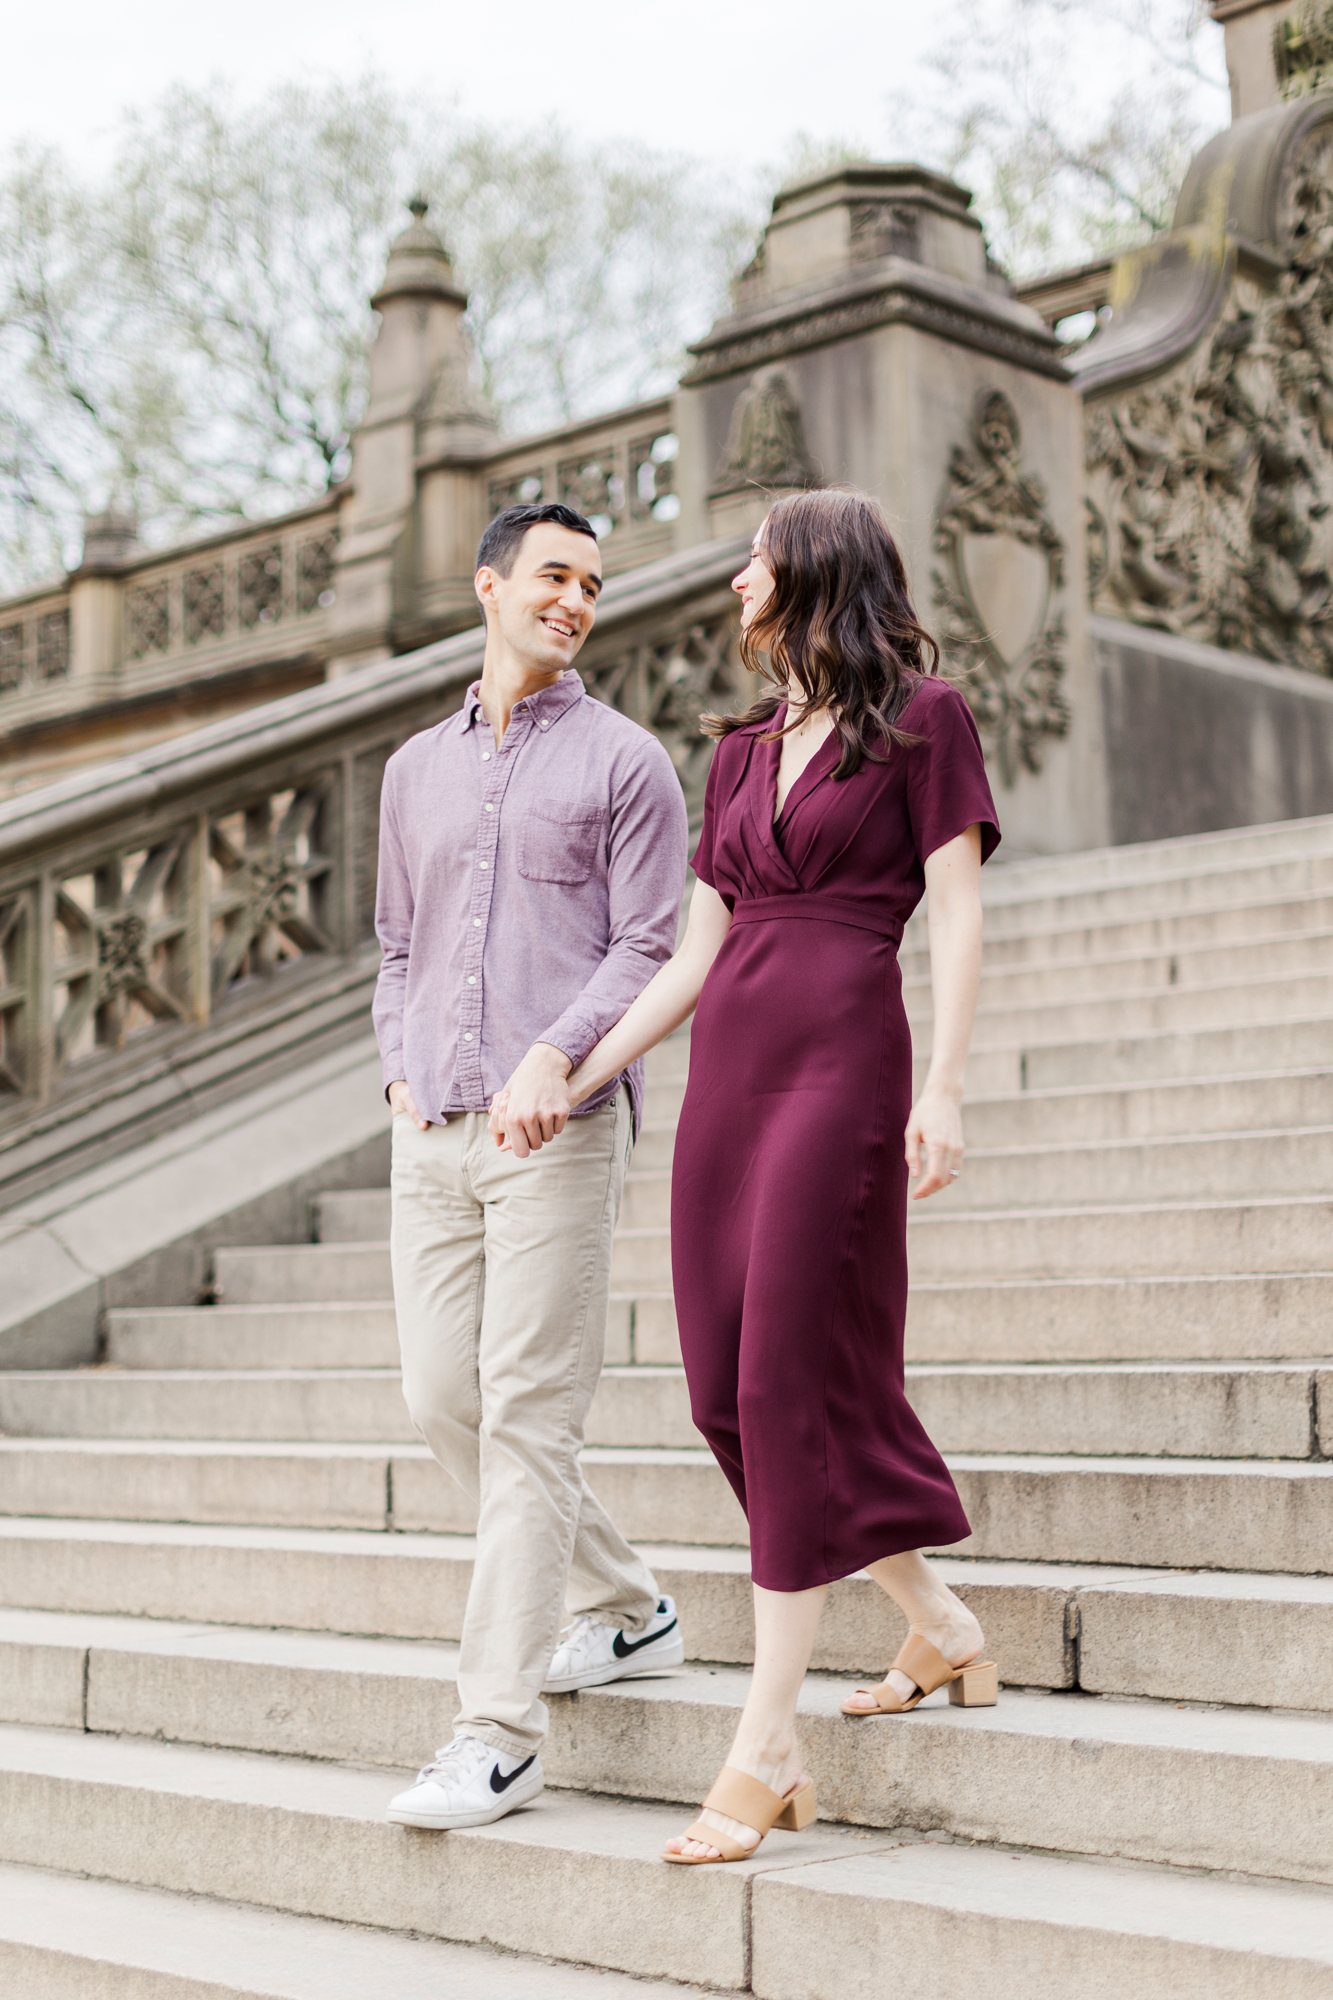 Charming Central Park Photo Shoot